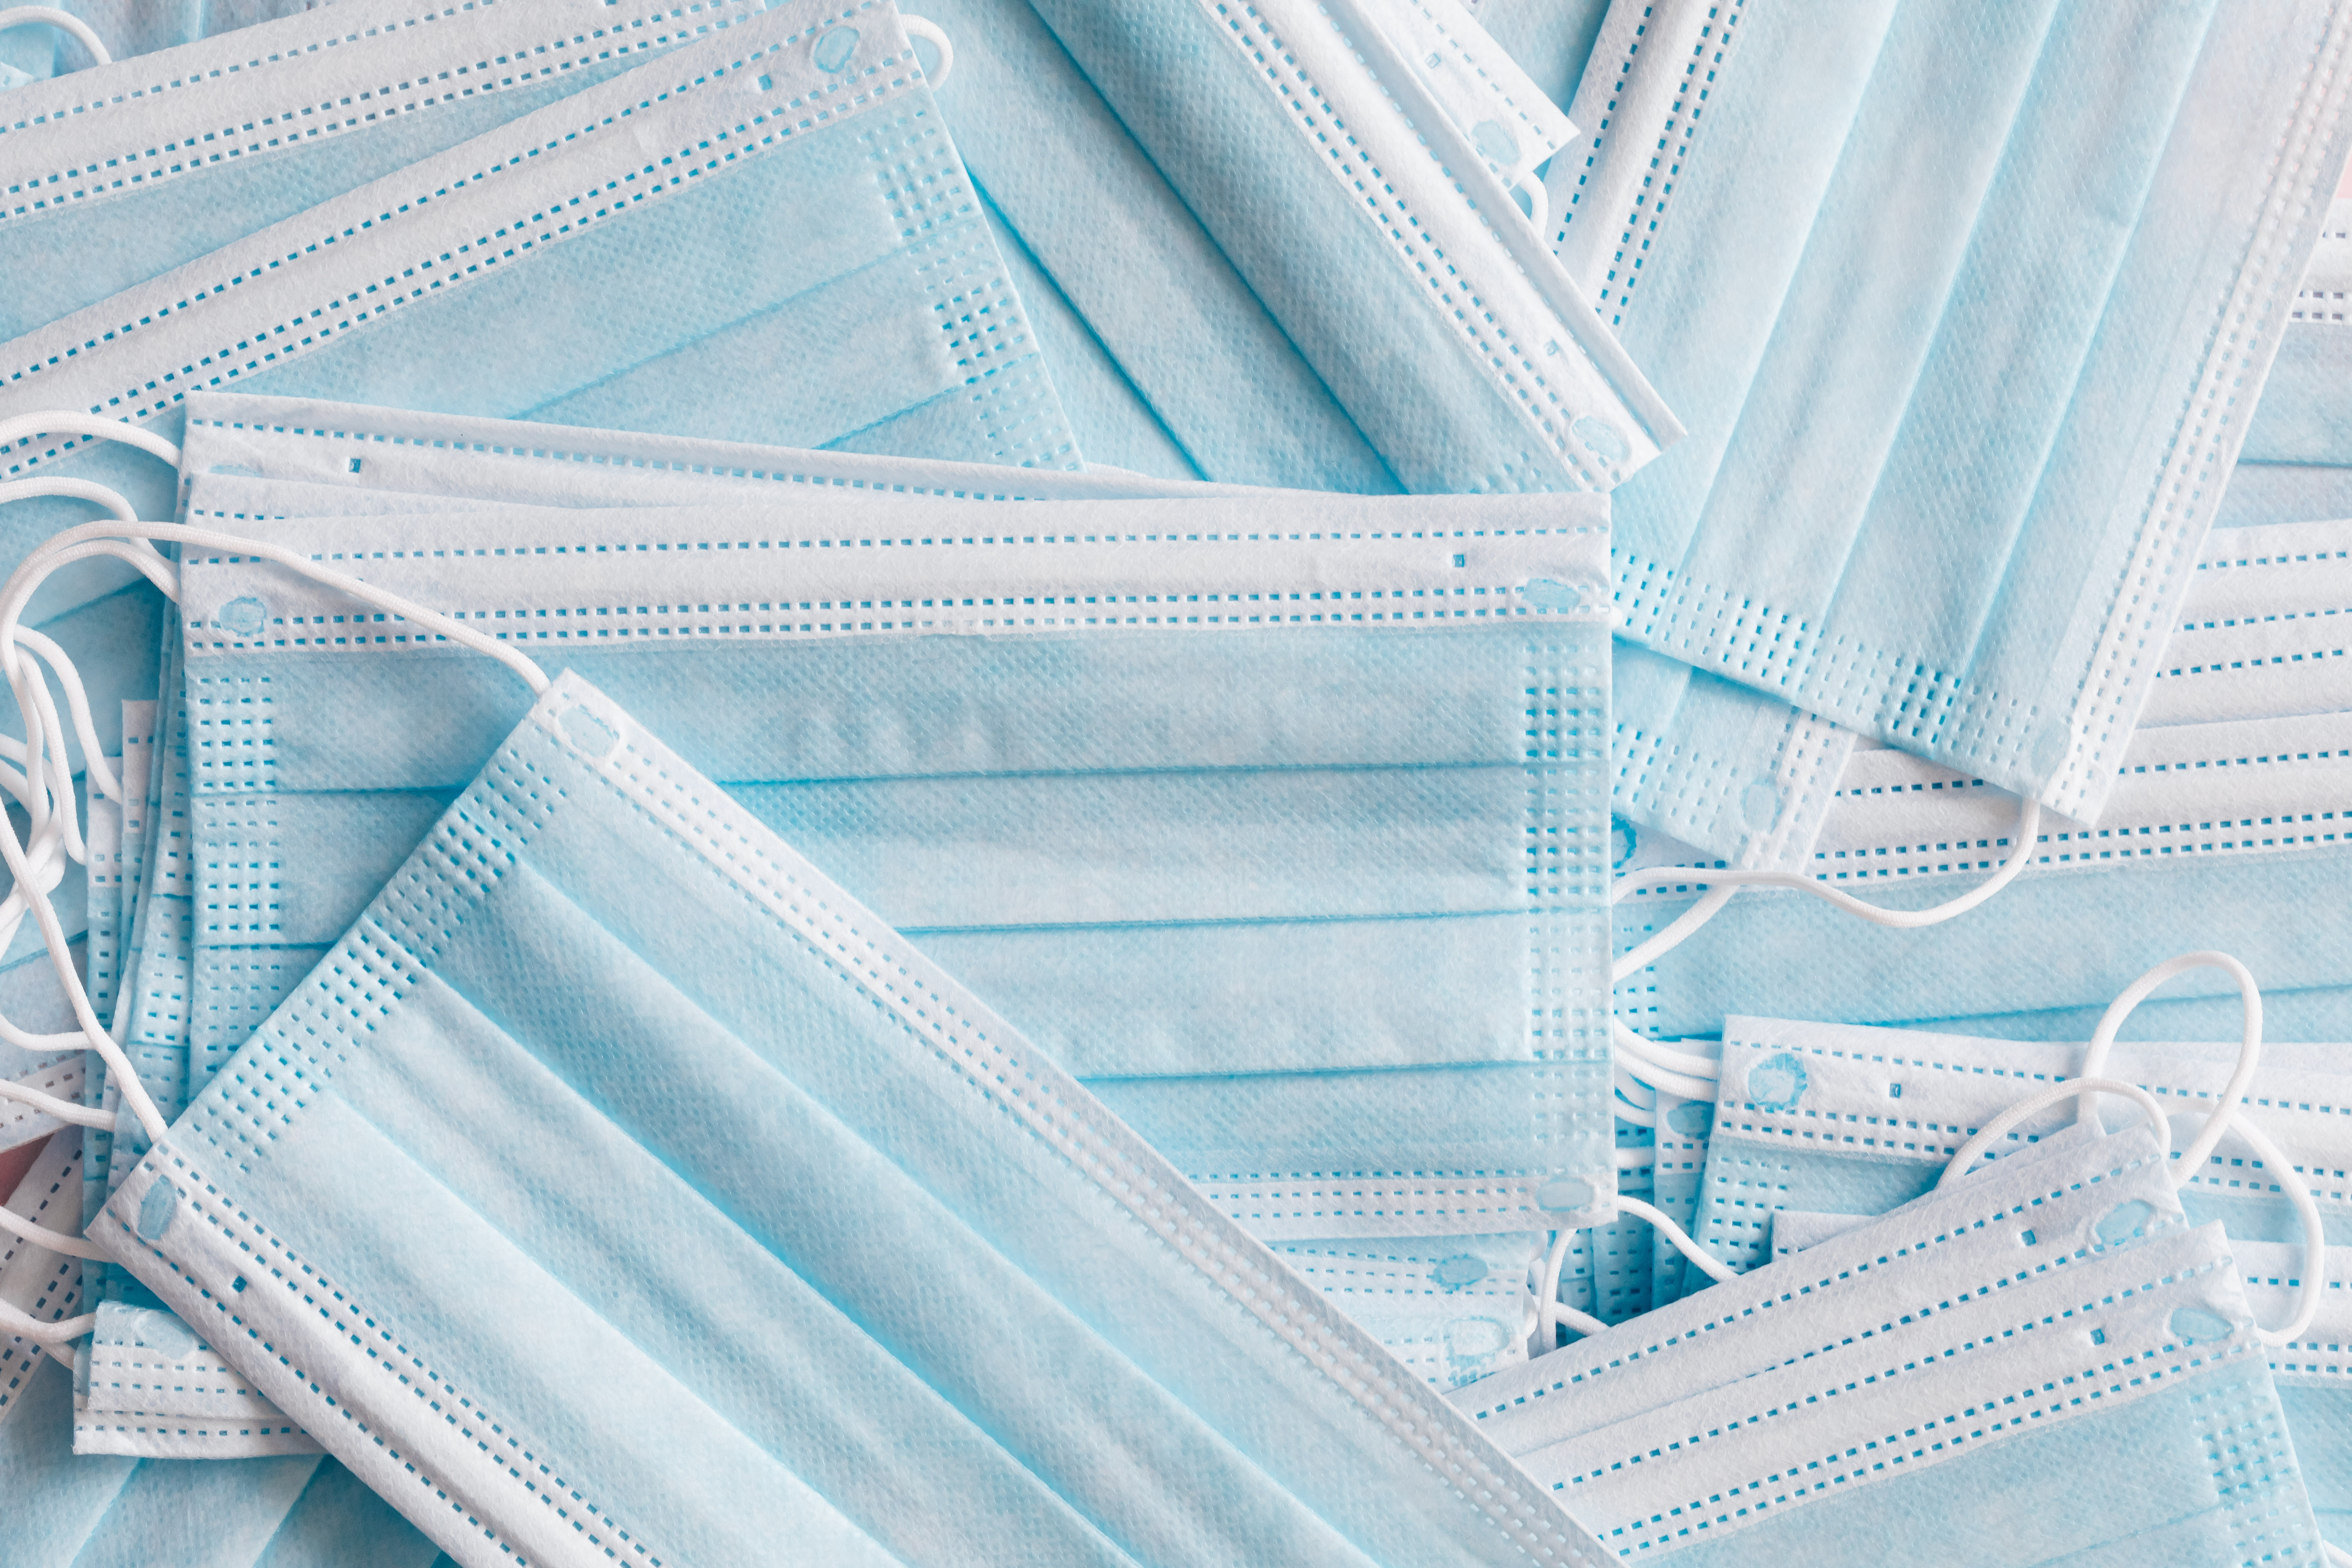 Blue single use medical face masks in a pile